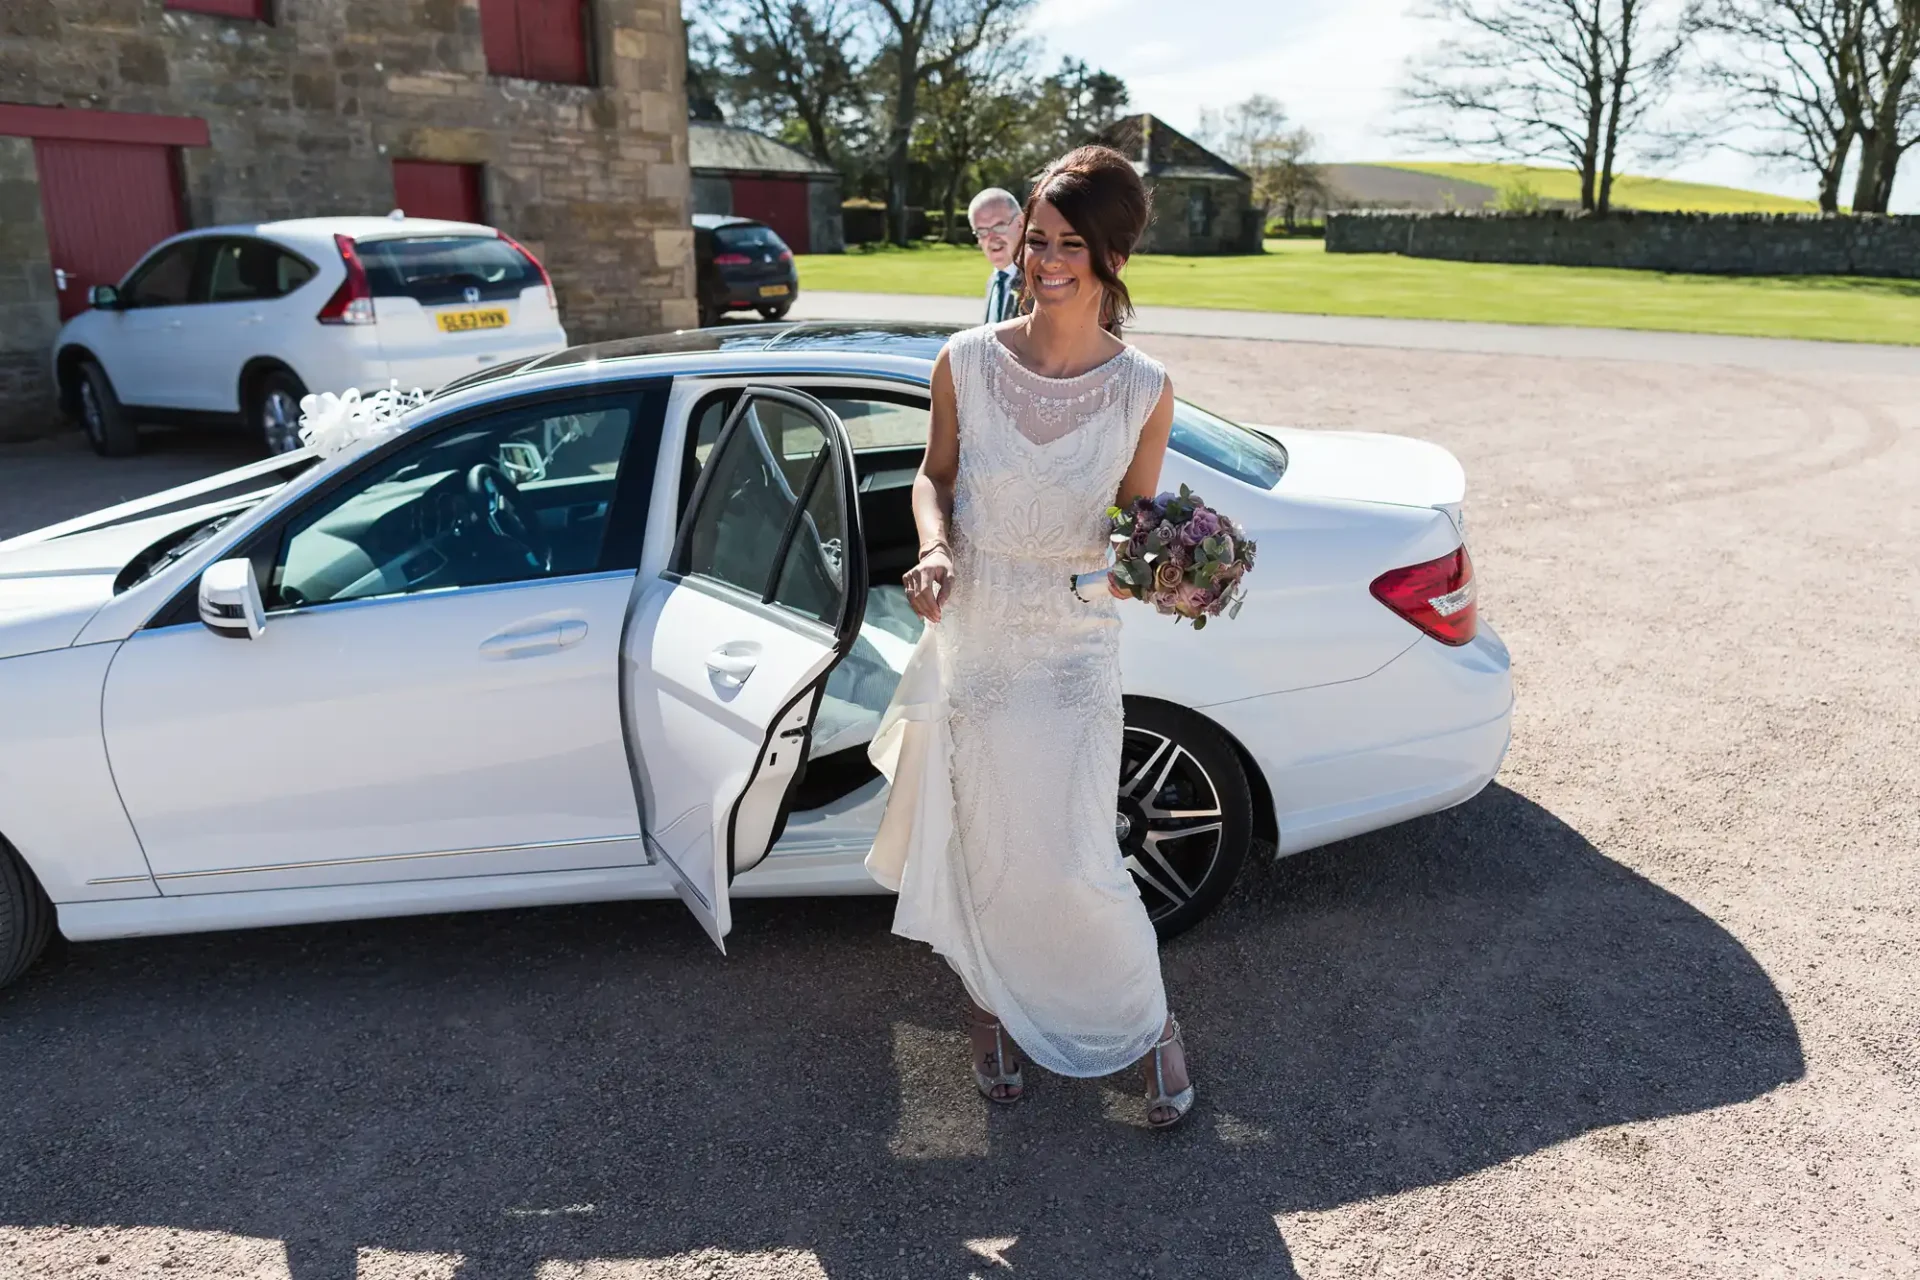 A bride in a white dress holding a bouquet steps out from a white luxury car on a sunny day.